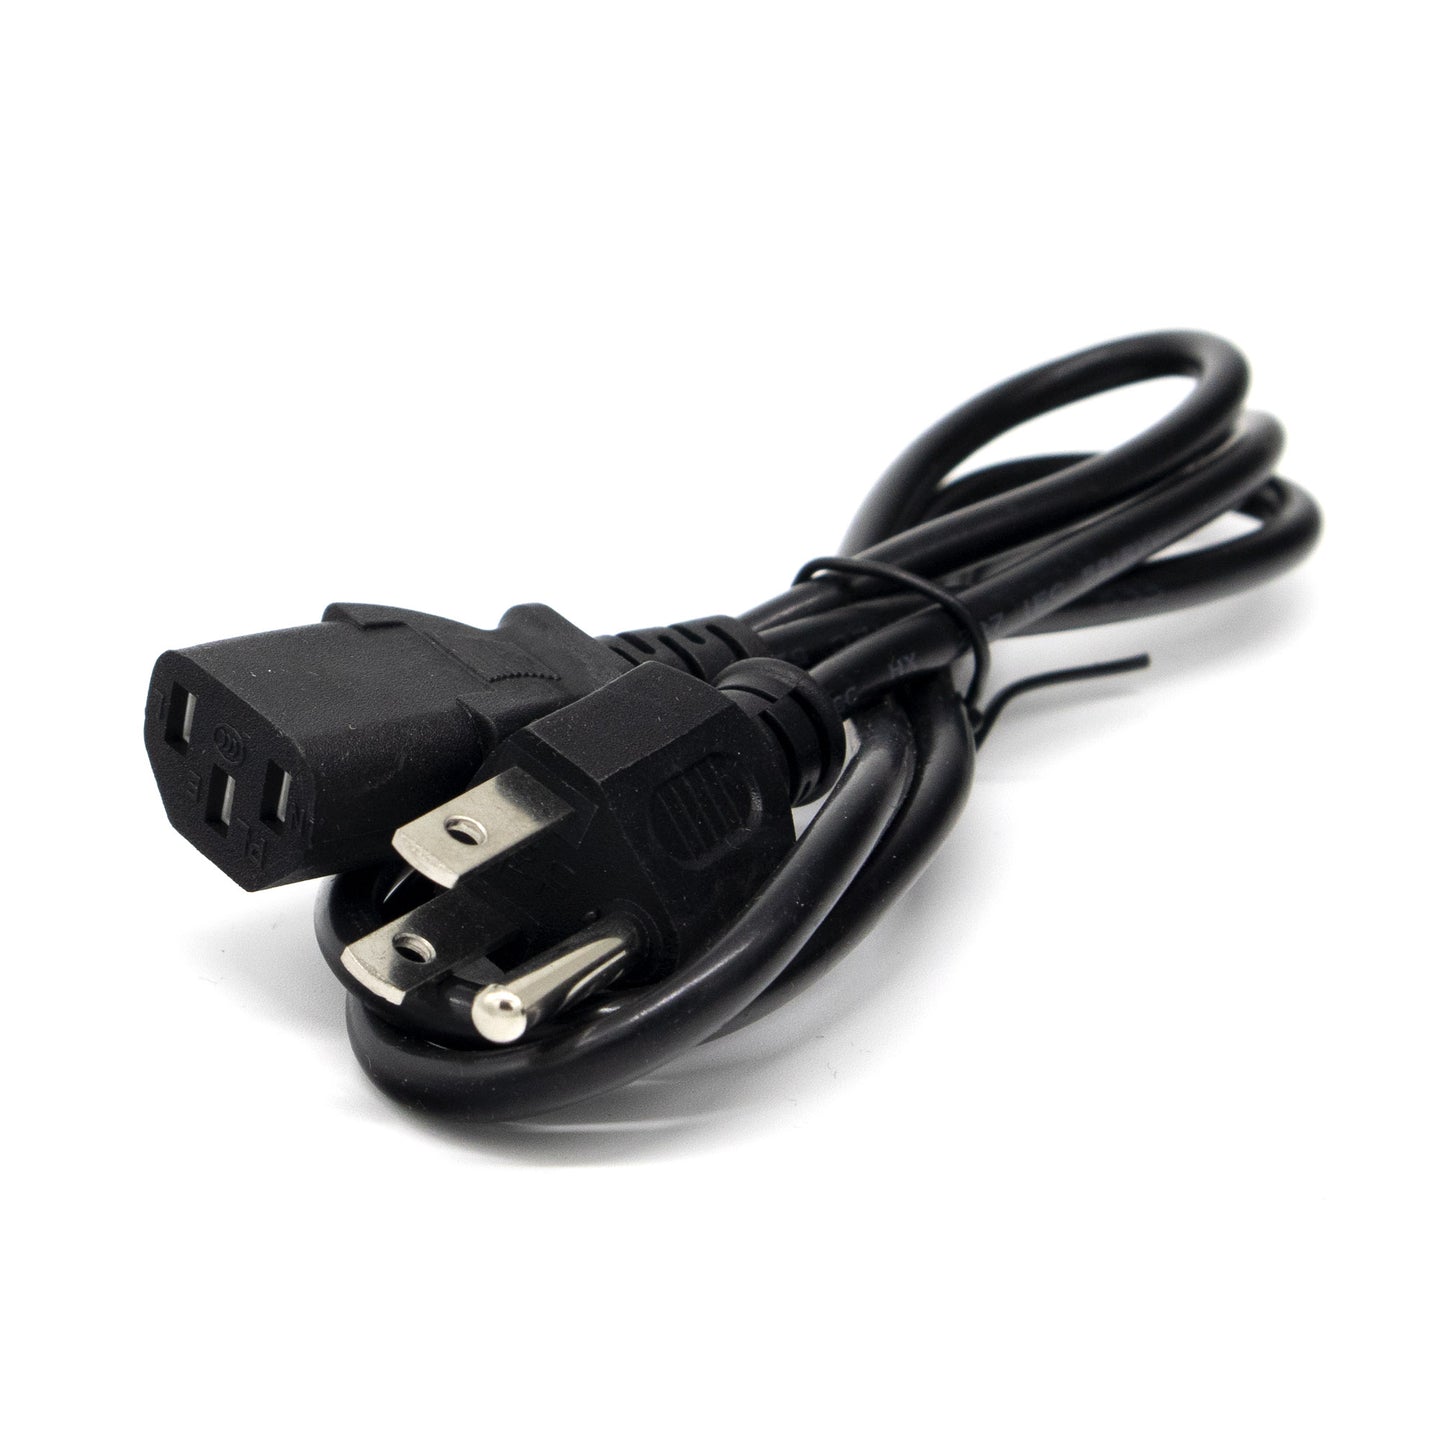 3 Prong power cord